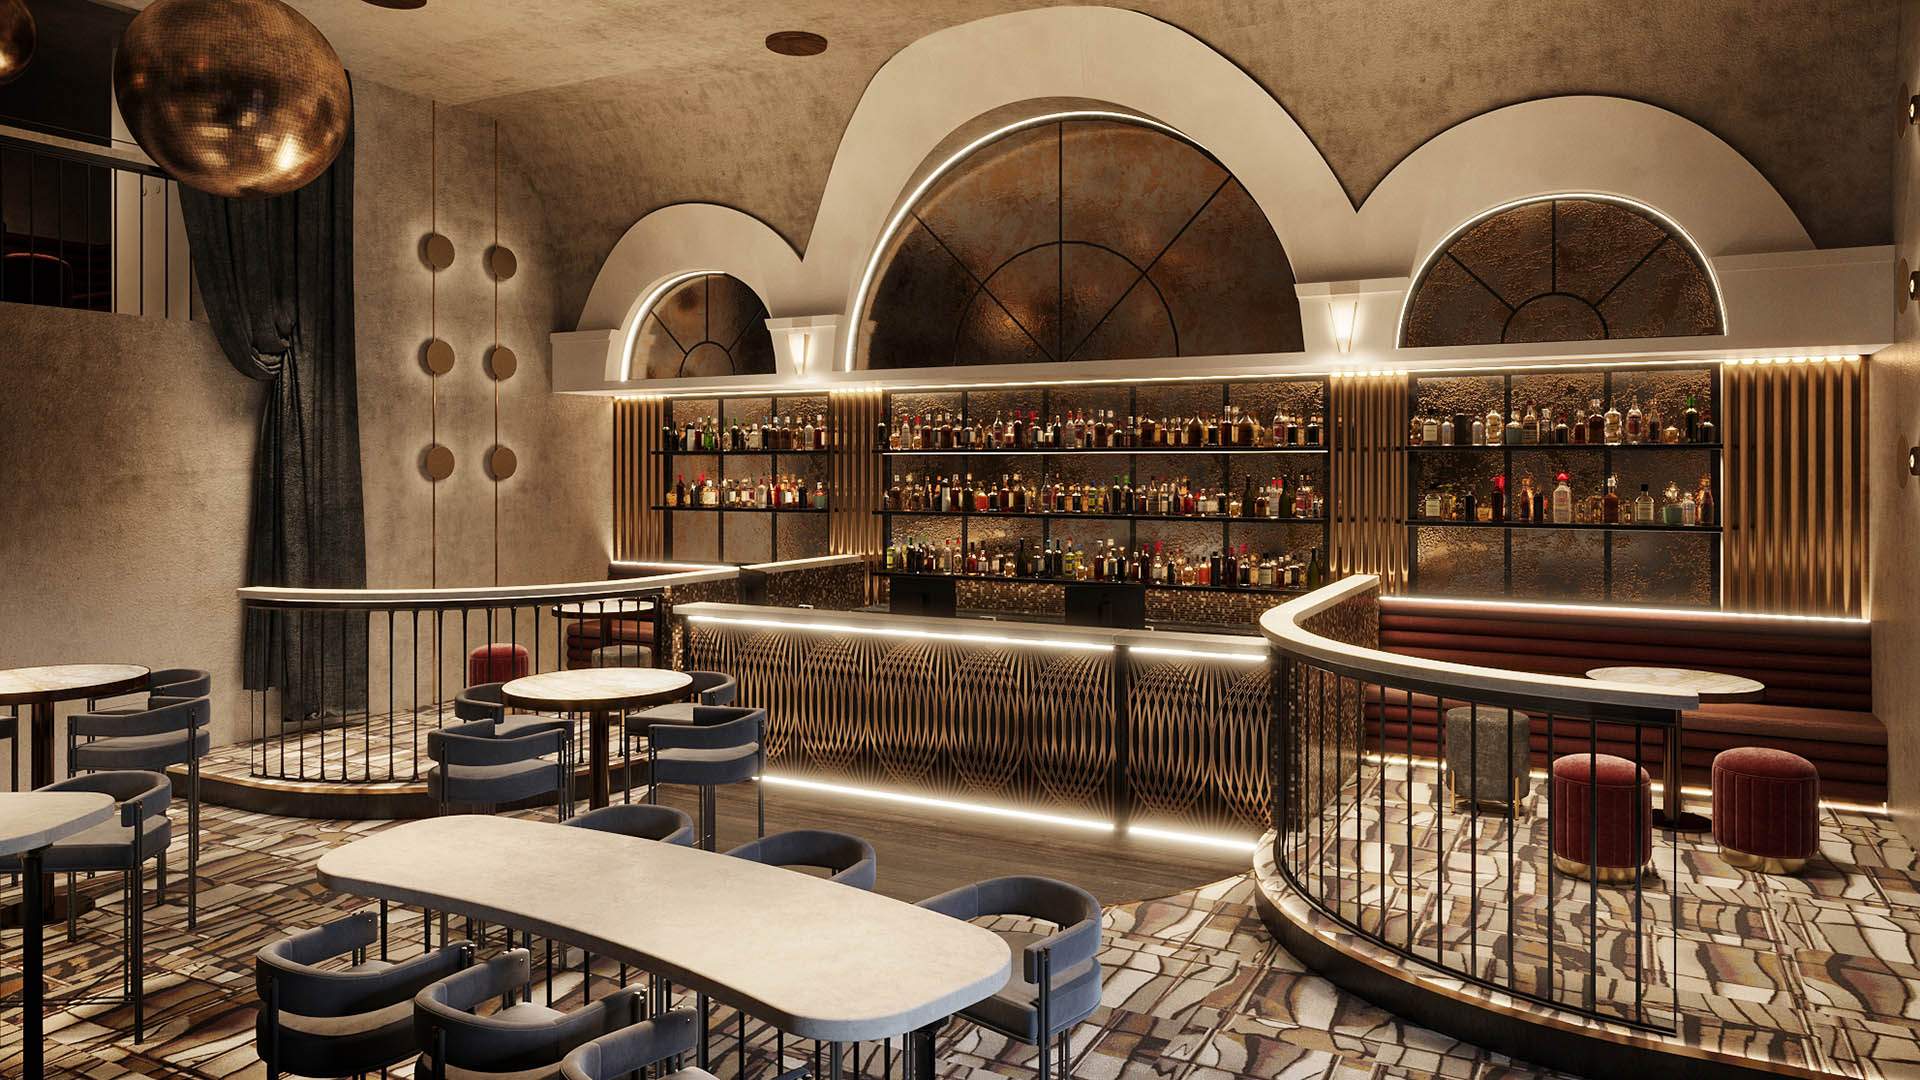 Coming Soon: GPO Hotel Is Finally Relaunching in July After Its Hefty $9-Million Revamp